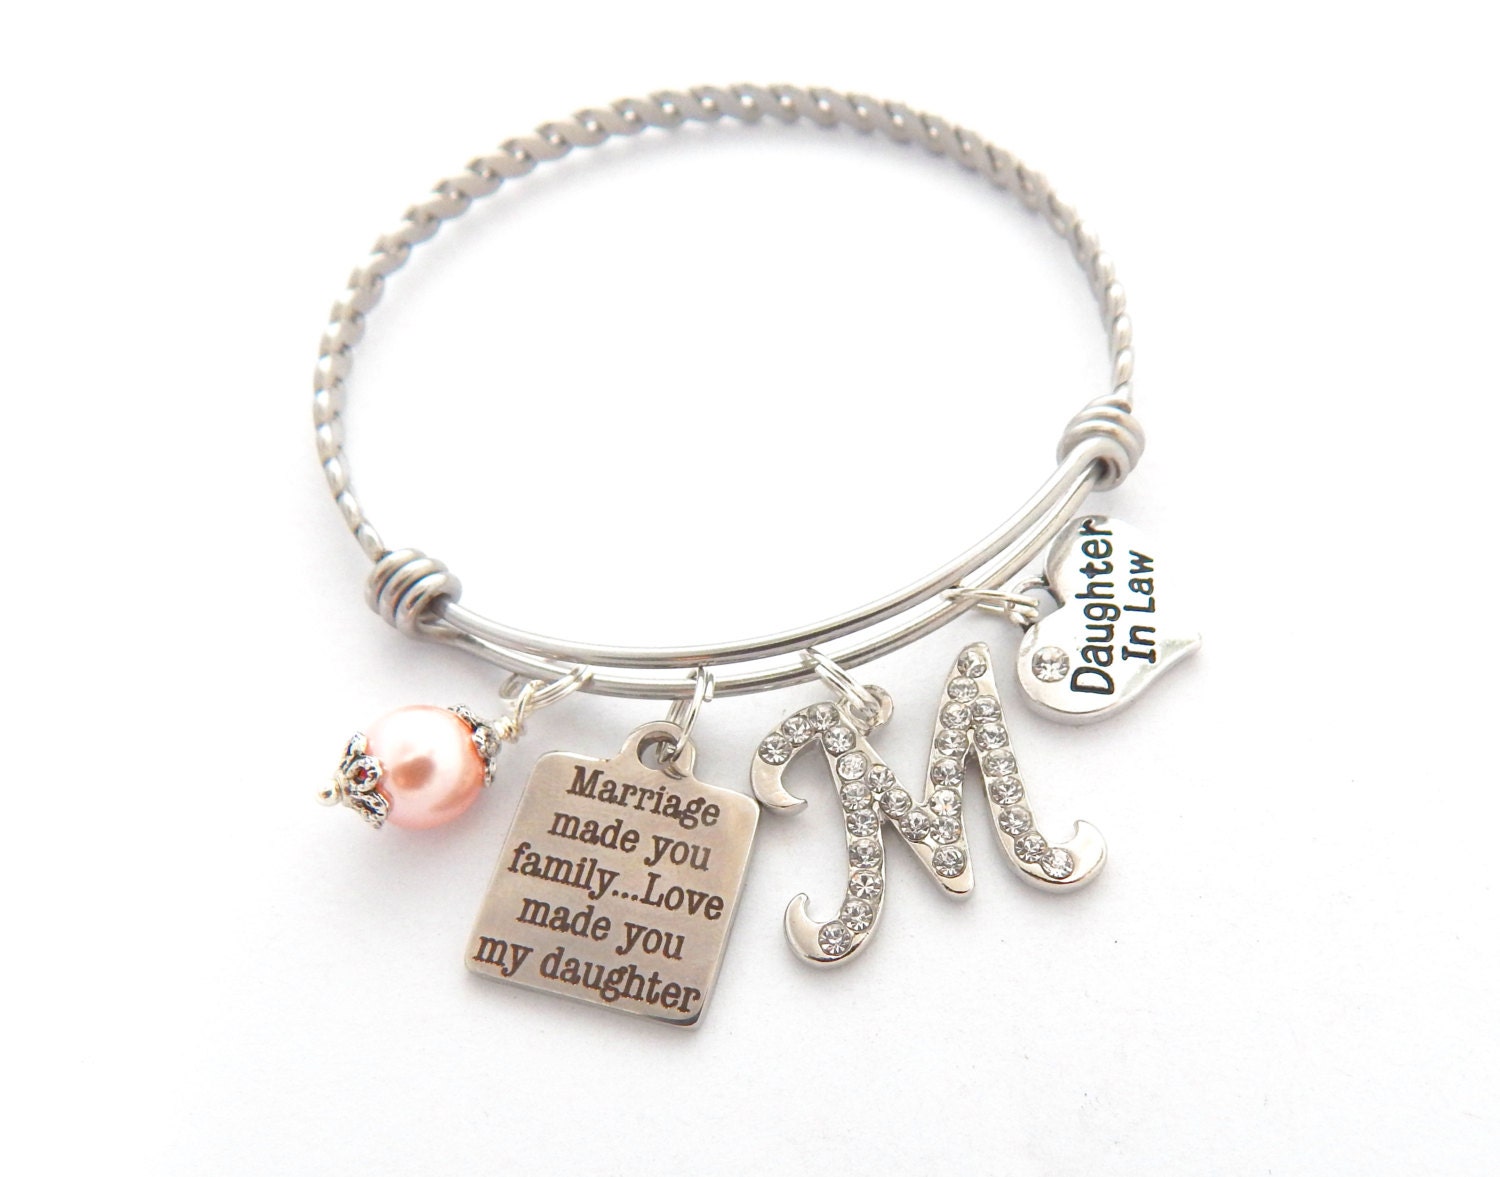 Future Daughter in Law BRACELET, Daughter in Law Gift, BRIDE to be Gift, Charm Bracelet, Marriage made you family, love made you my daughter